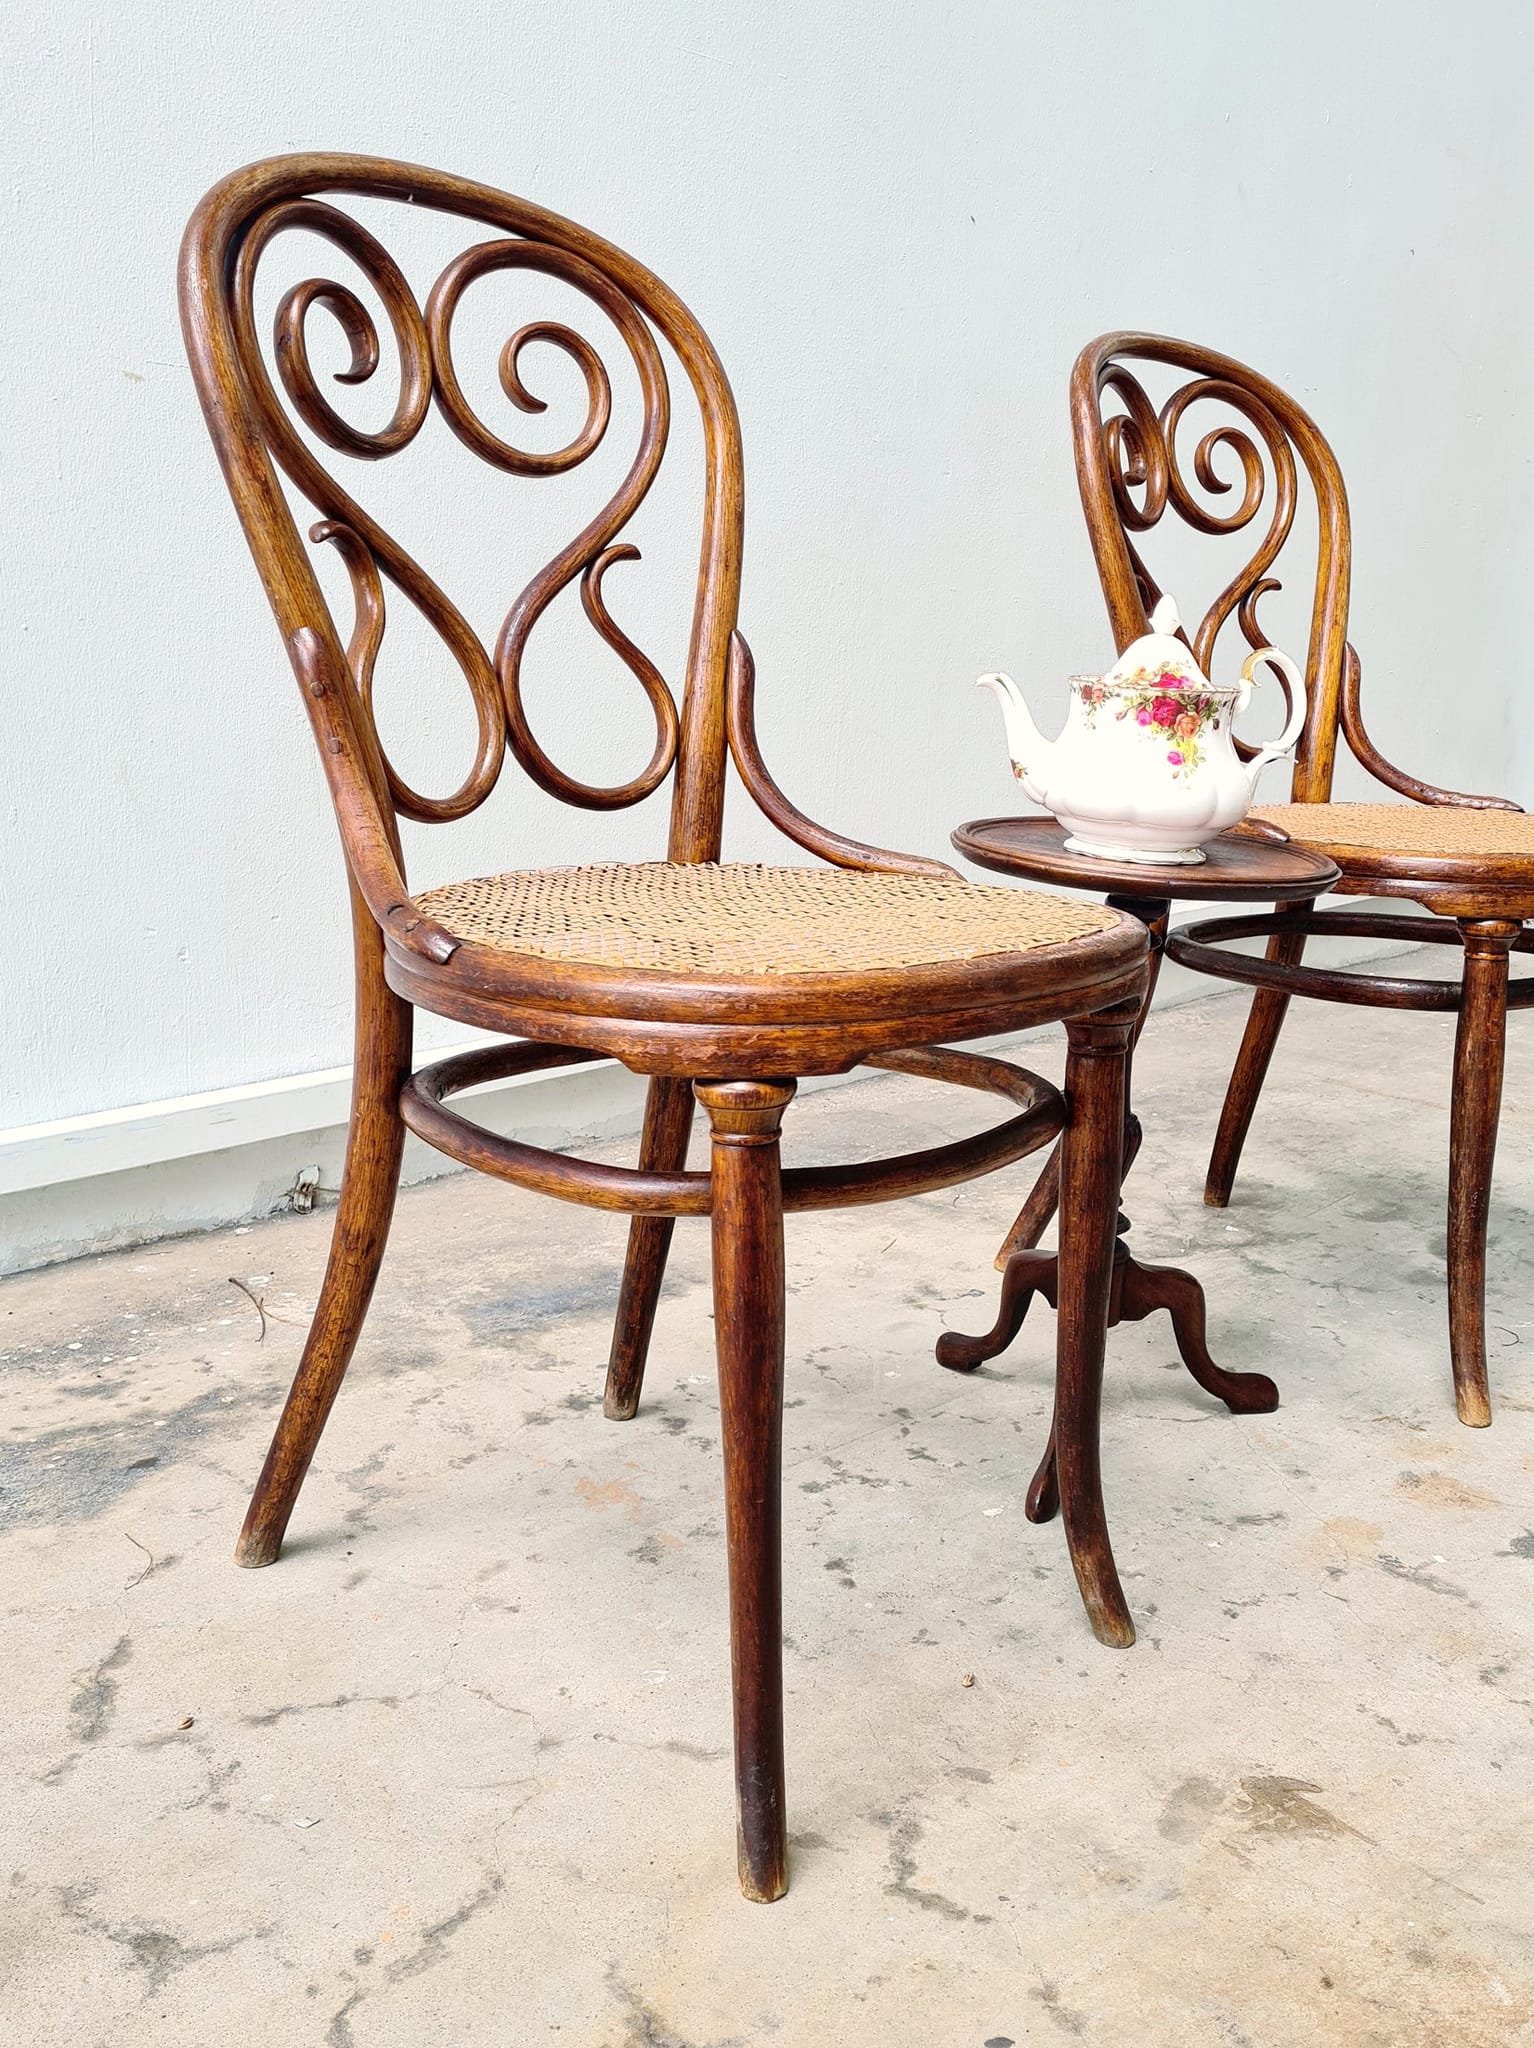 A pair of Original Thornet bent wood chair from England 